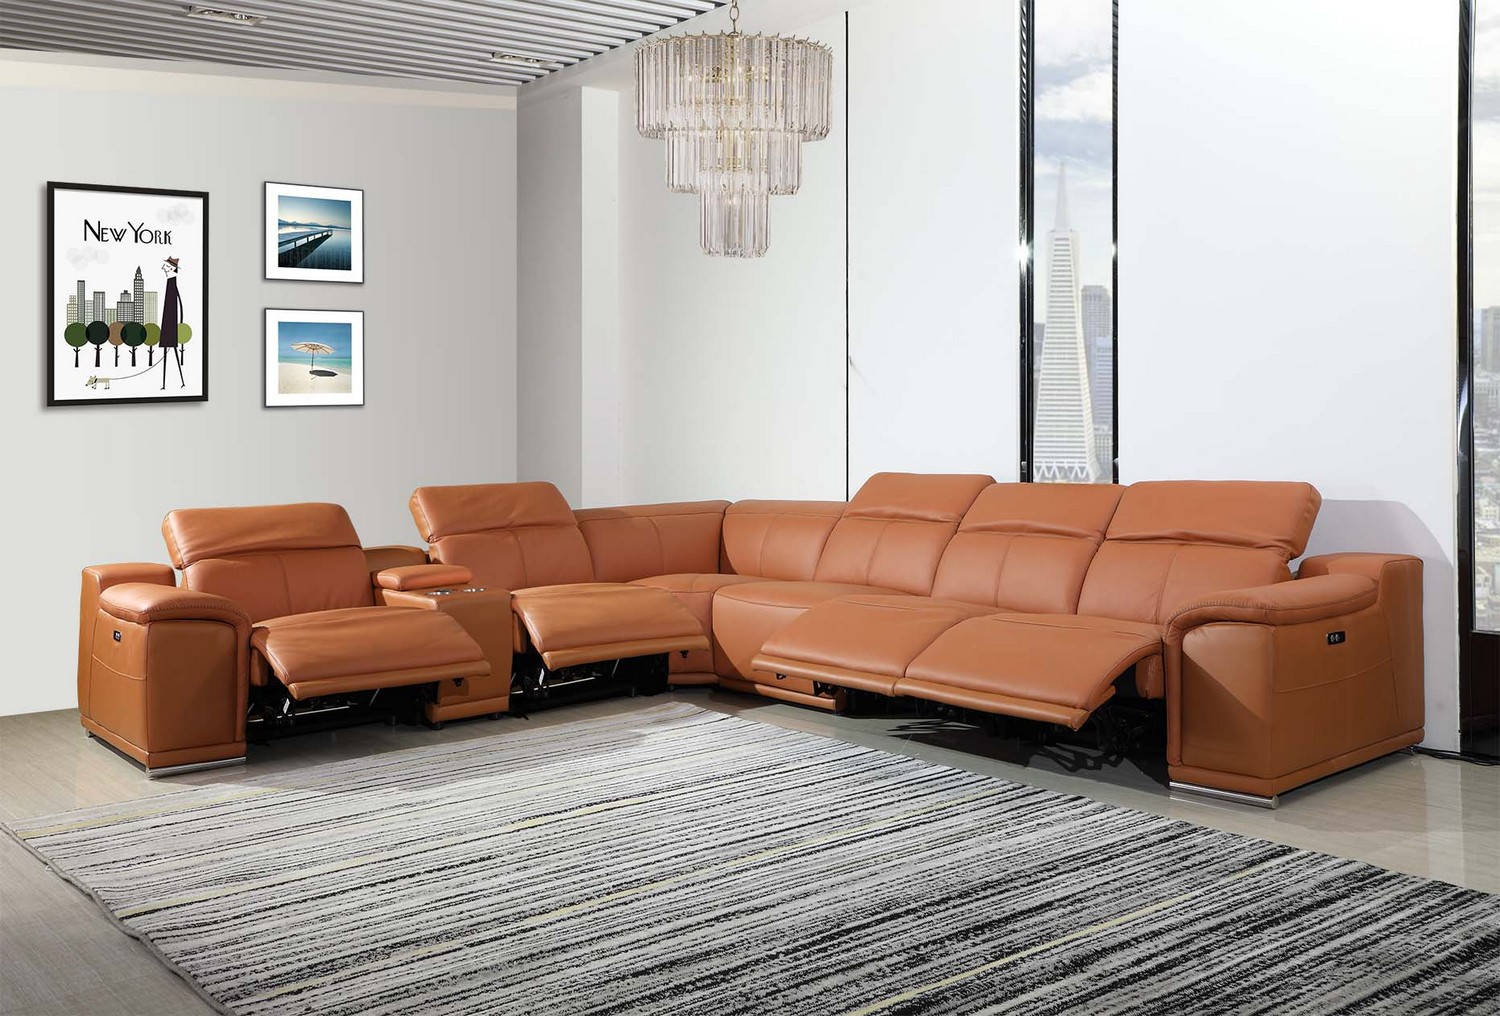 254" X 280" X 237.4" Camel Power Reclining 7PC Sectional